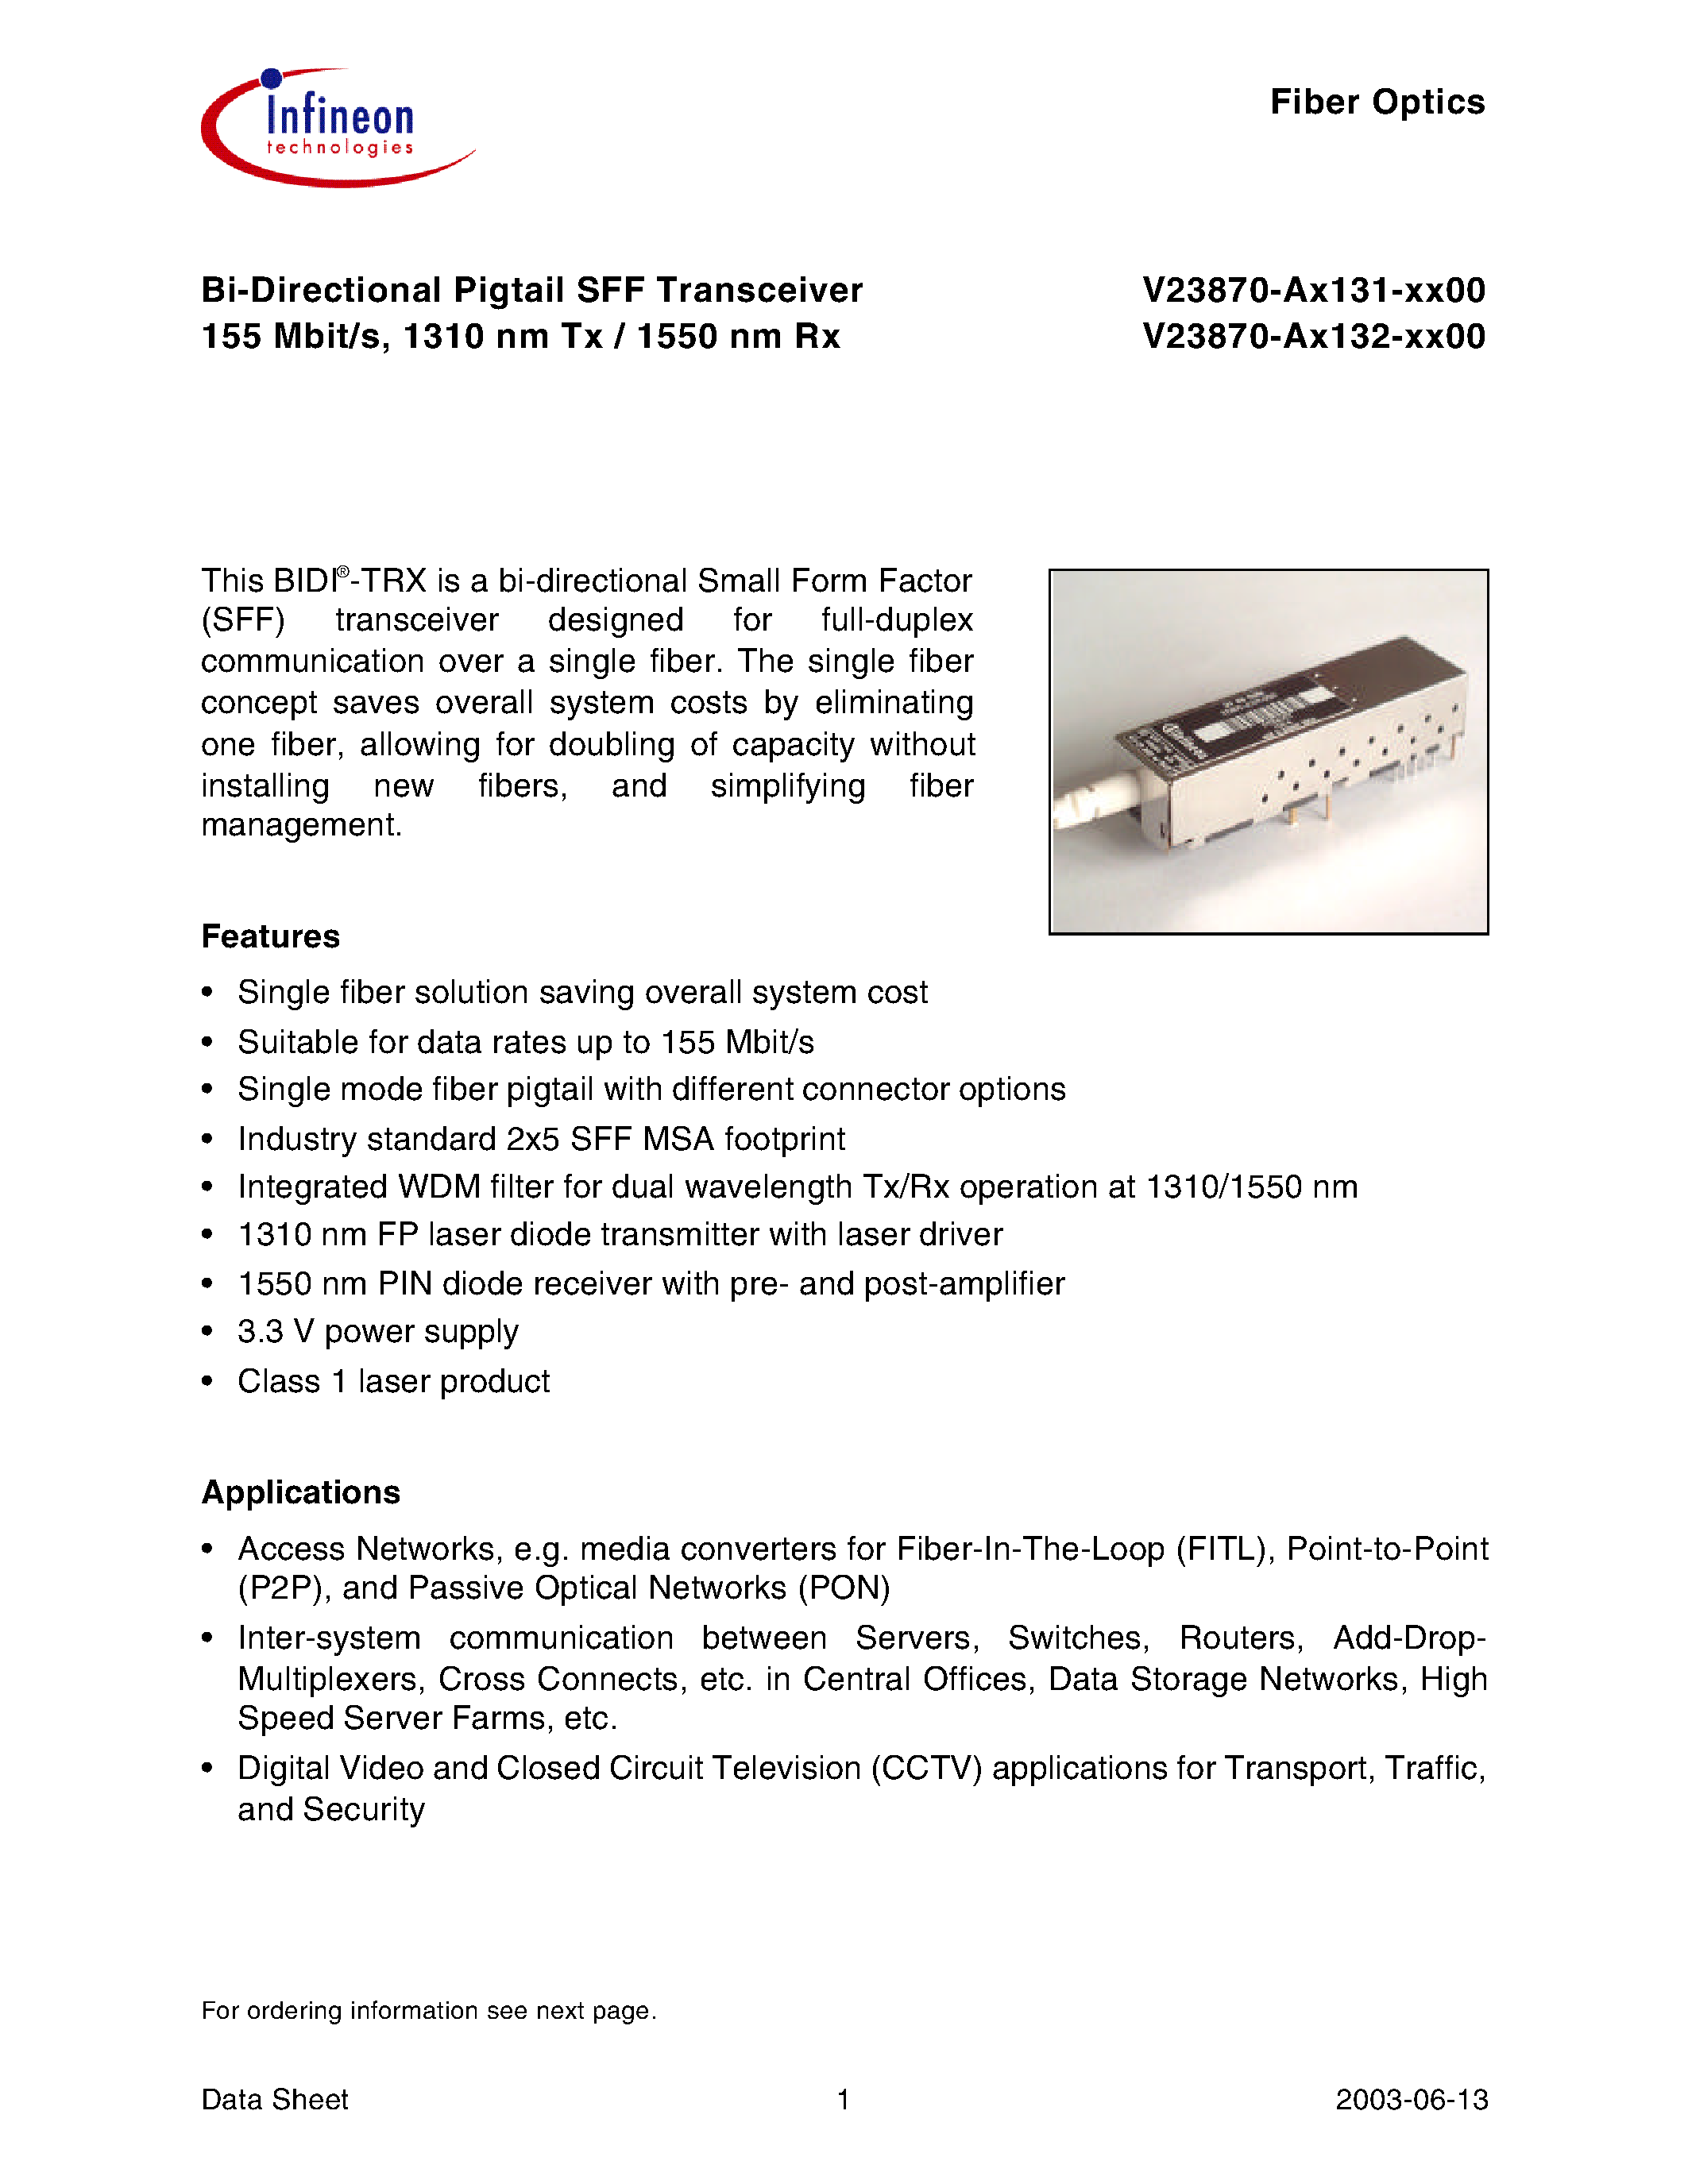 Datasheet V23870-A1131-F500 - Bi-Directional Pigtail SFF Transceiver 155 Mbit/s/ 1310 nm Tx / 1550 nm Rx page 1